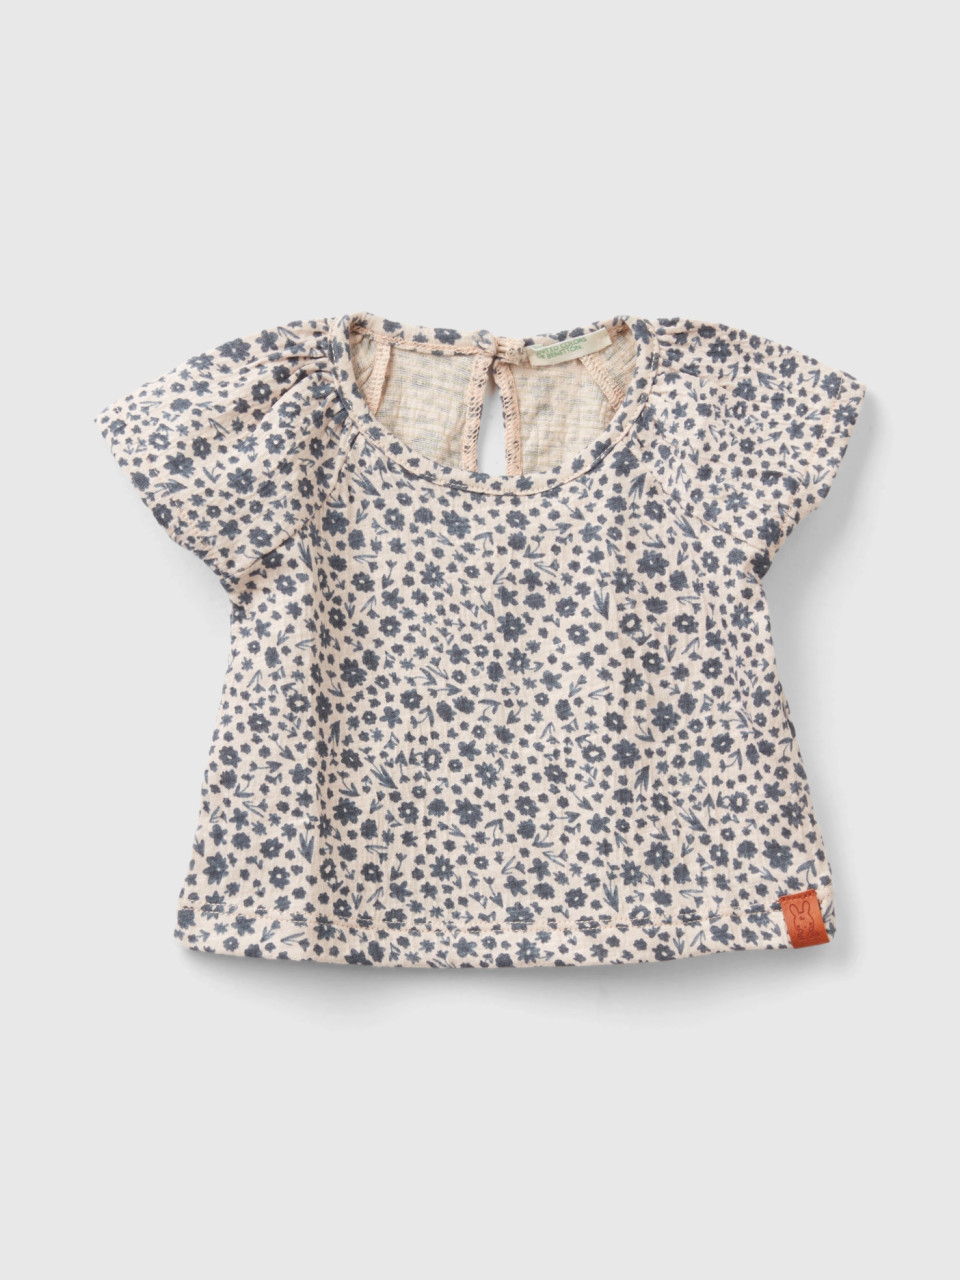 Benetton, T-shirt With Floral Print, Multi-color, Kids